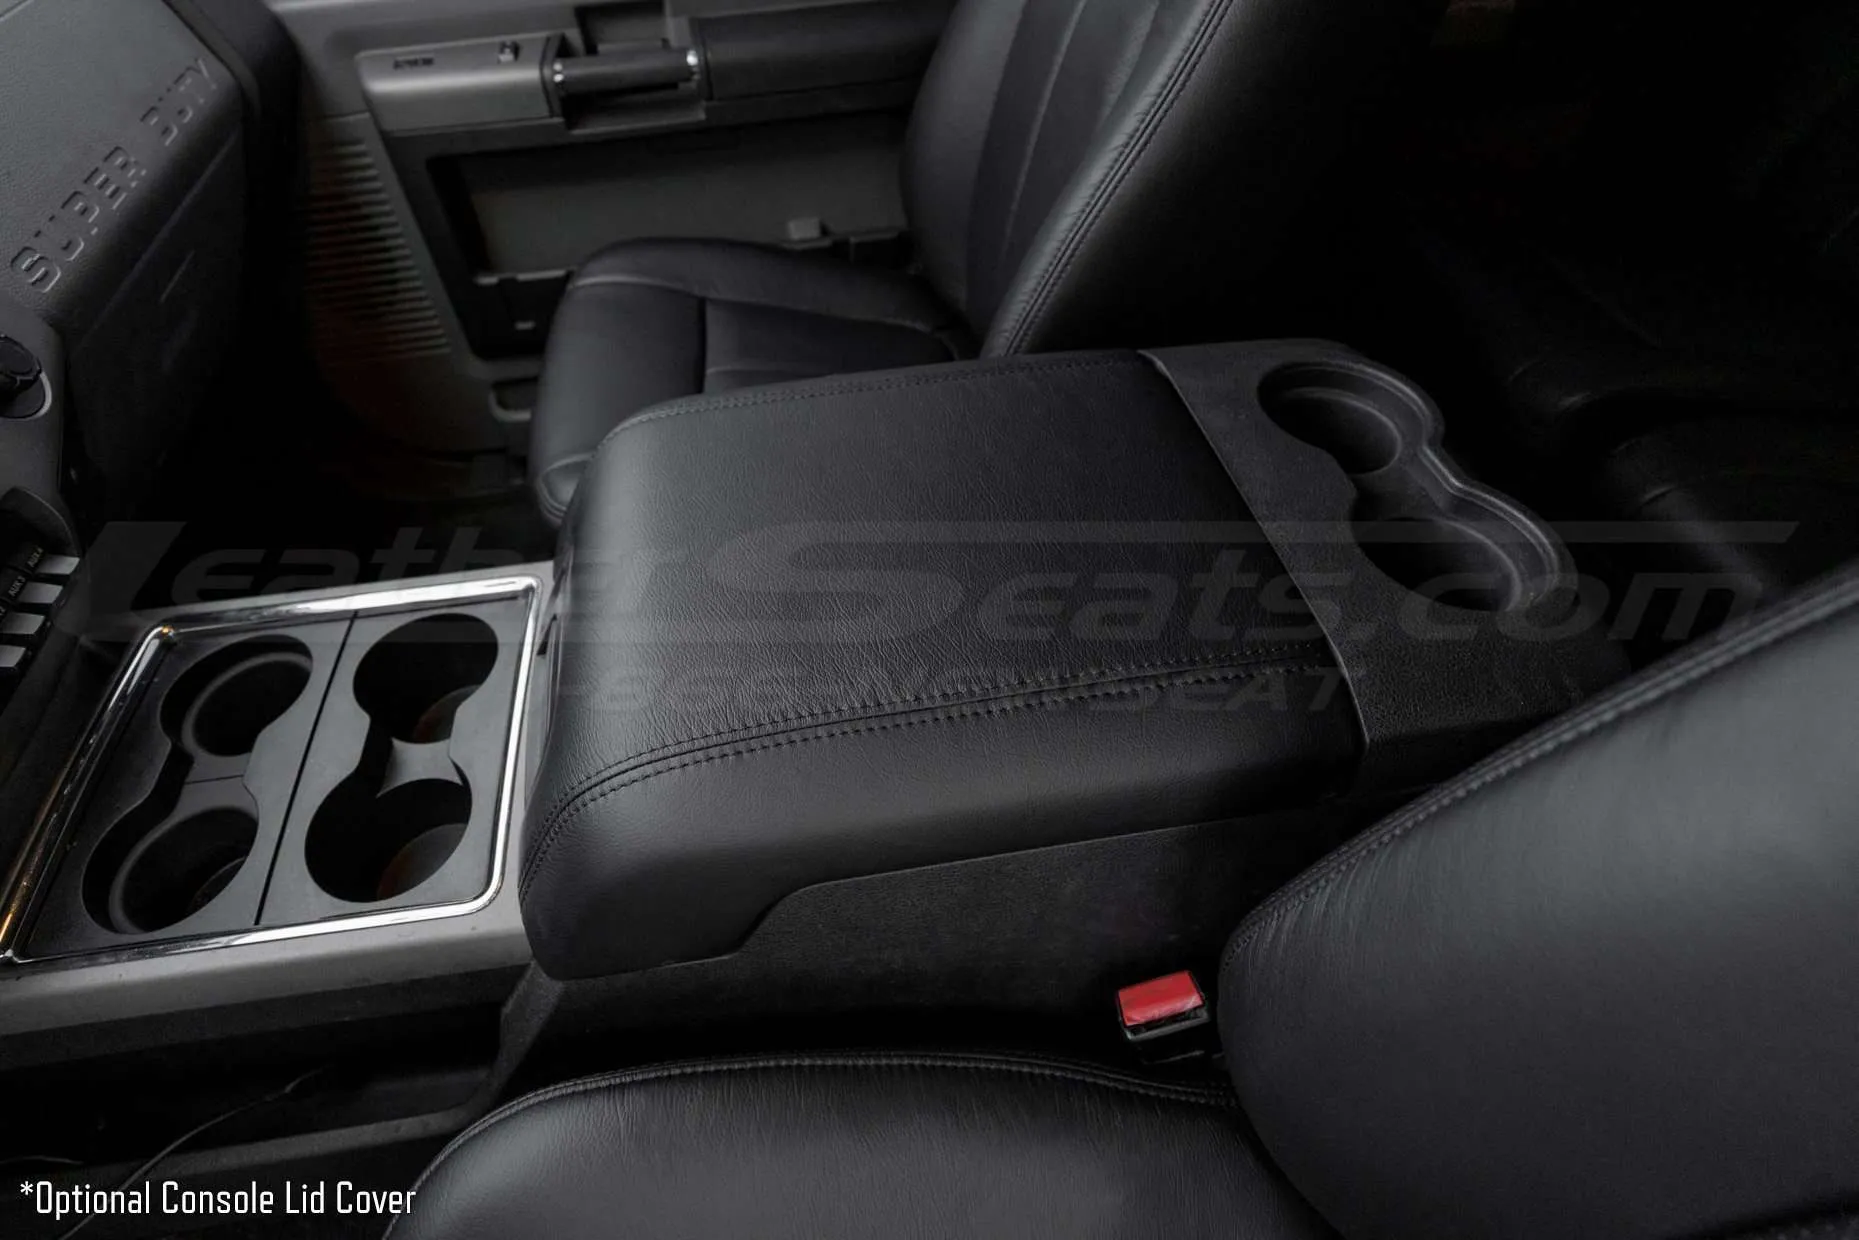 Optional Console Lid Cover in Black